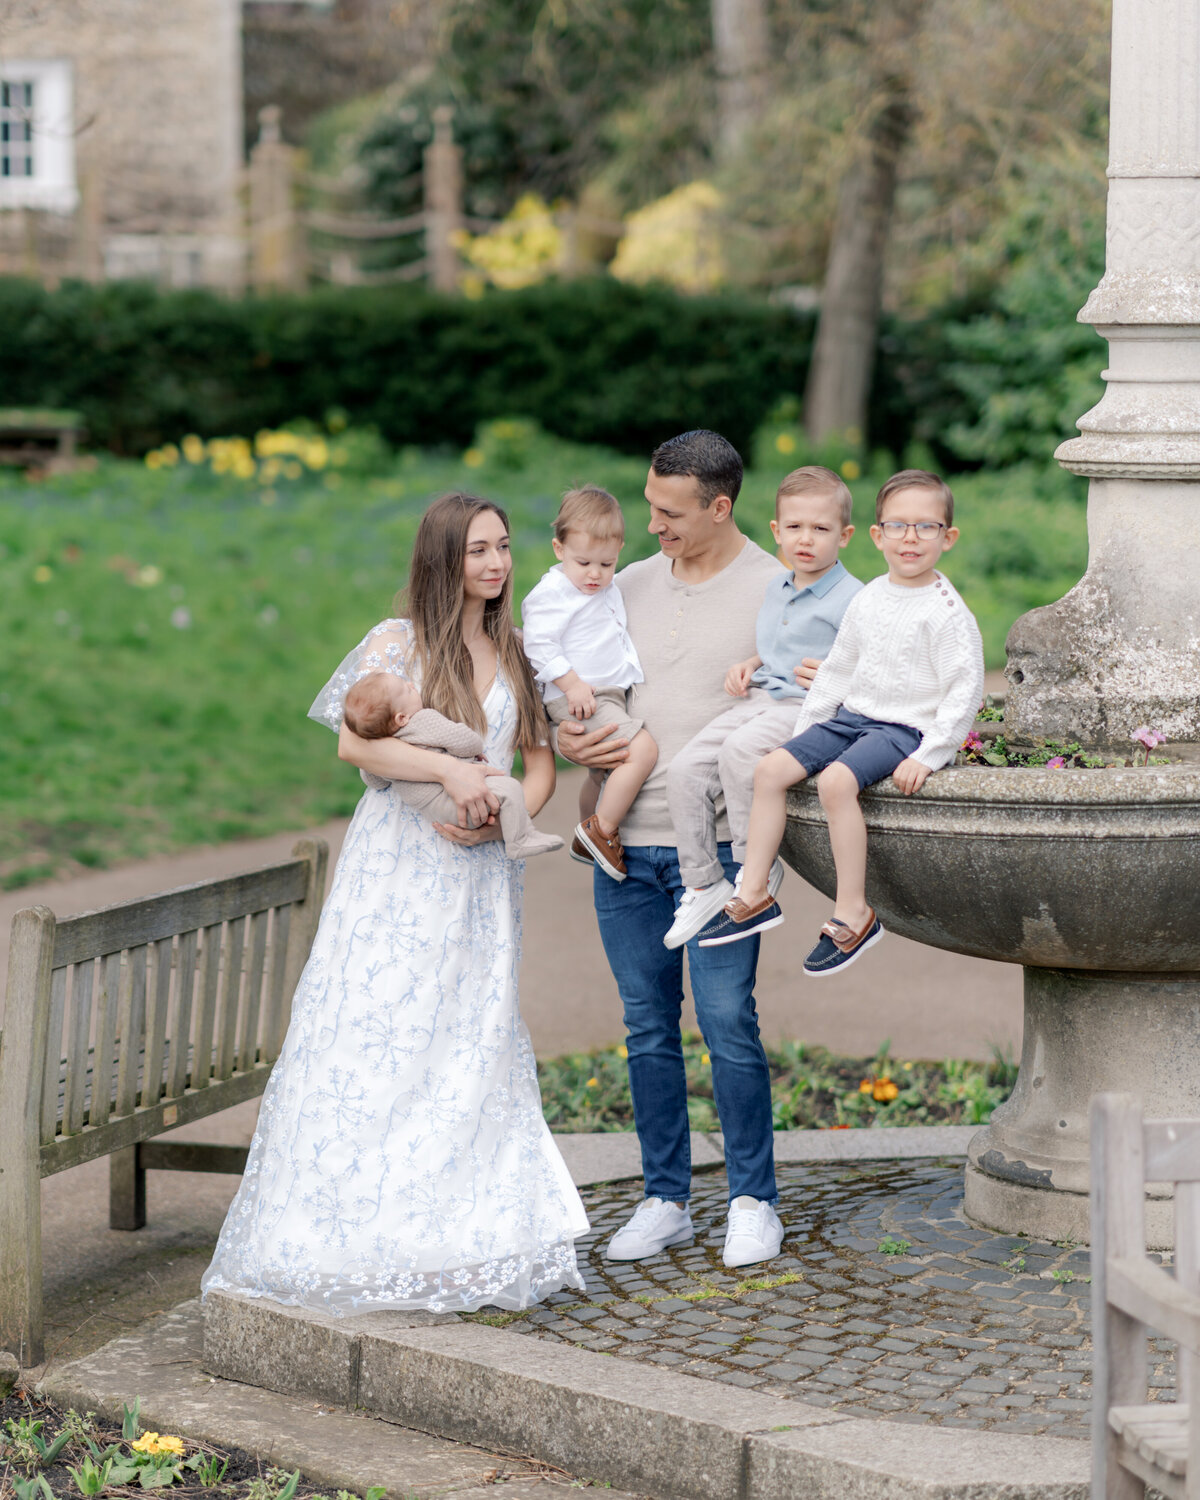 Large family stands next to scultupre in gardens by Savannah family photographer Courtney Cronin